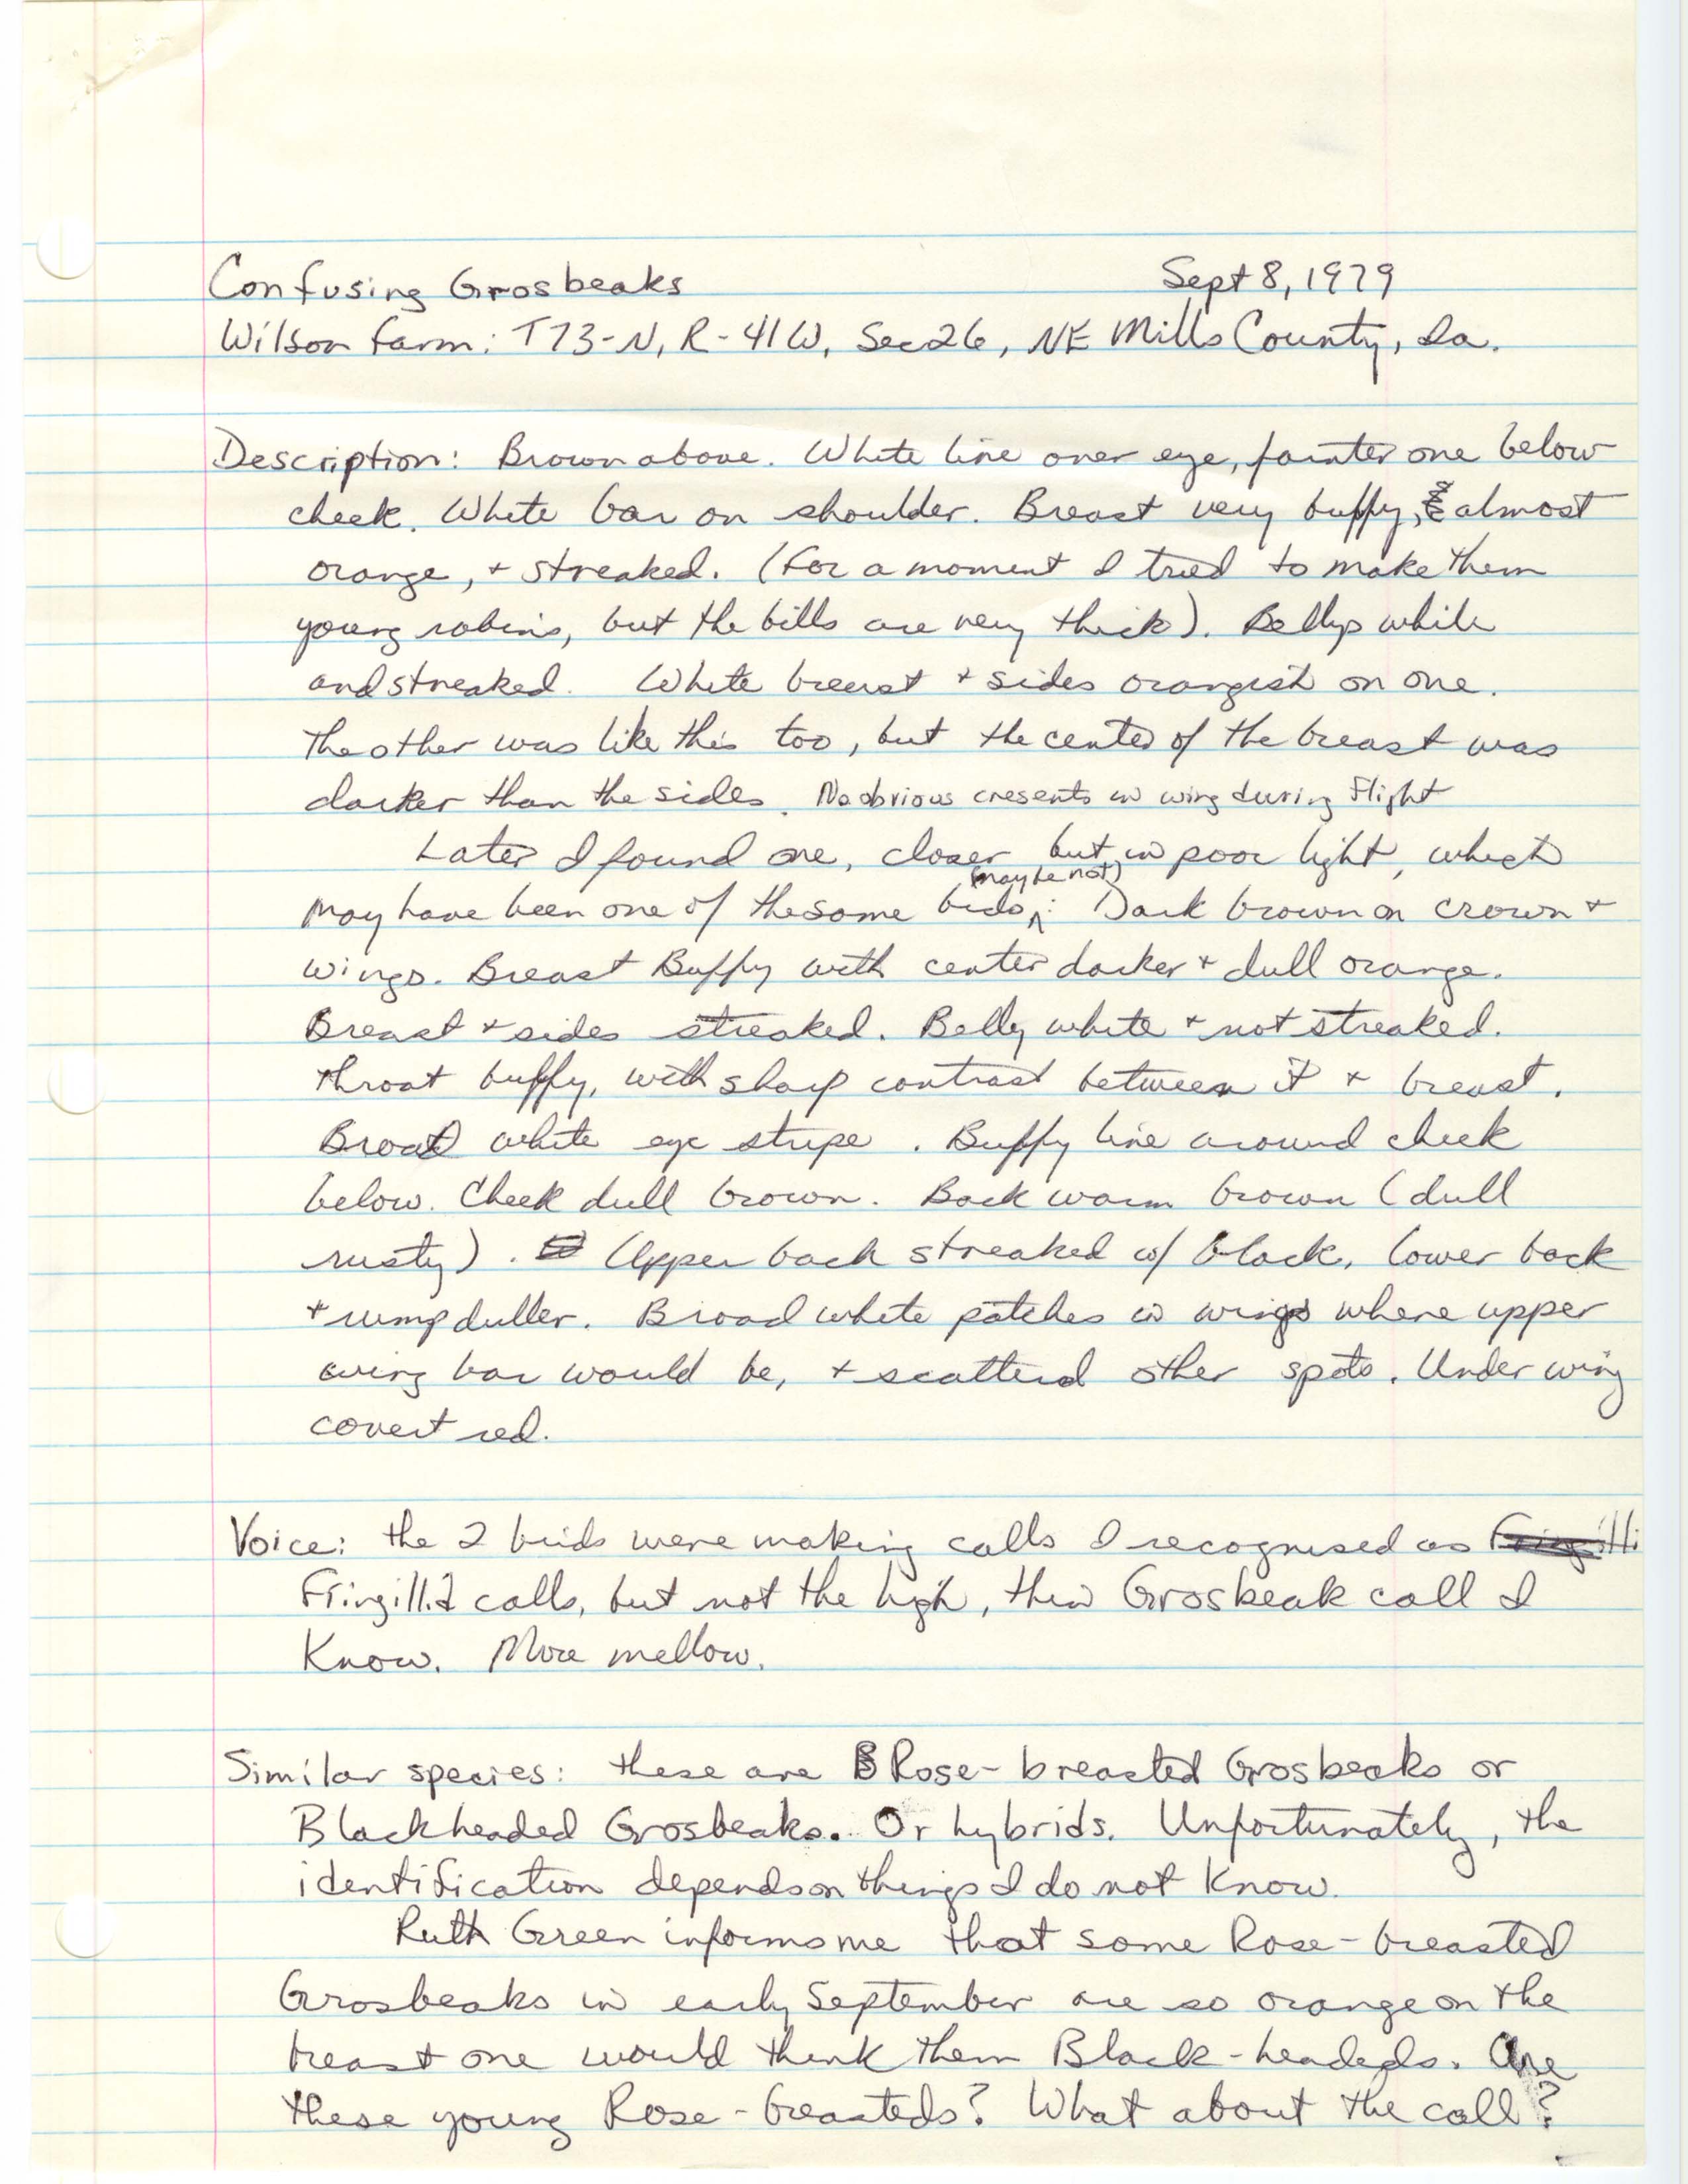 Rare bird documentation form for an unidentified Grosbeak at Anderson Township in Mills County, 1979